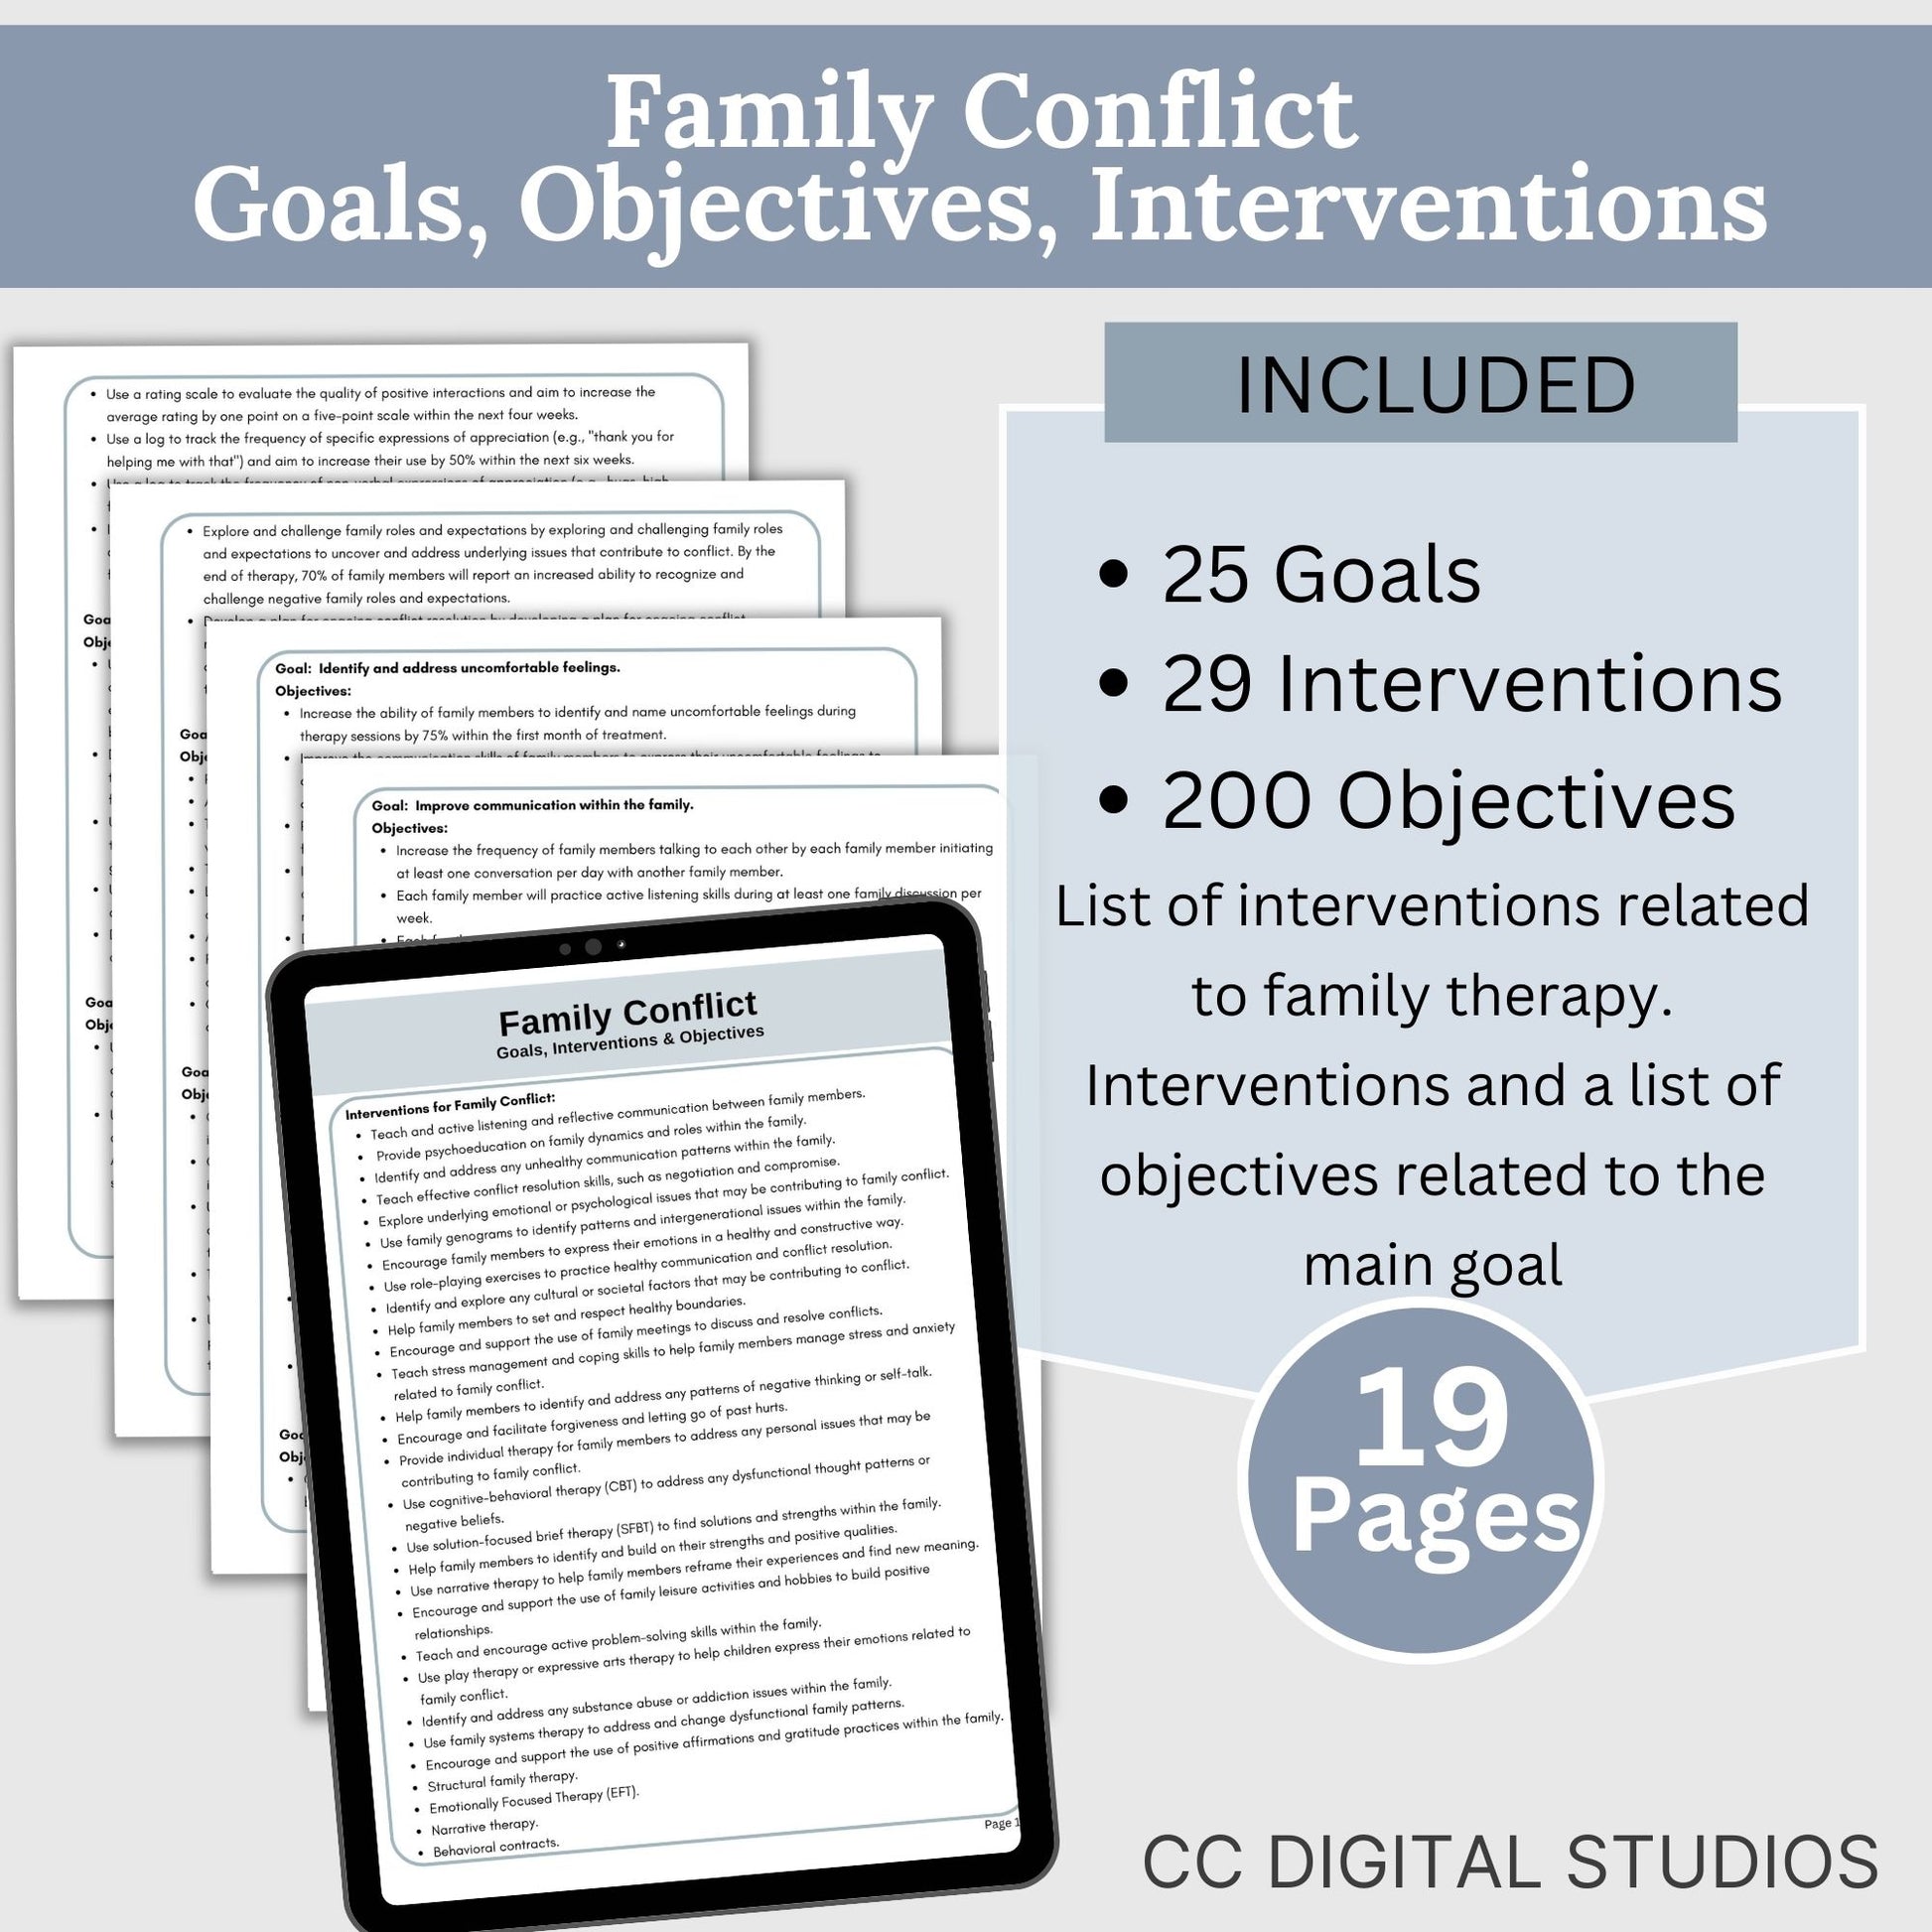 therapy goals, interventions, and measurable objectives.  This therapy tool is for treatment plans for depression, anxiety, substance abuse treatment plans, and anger management.  It includes 206 goals, 436 interventions and 1415 objectives.